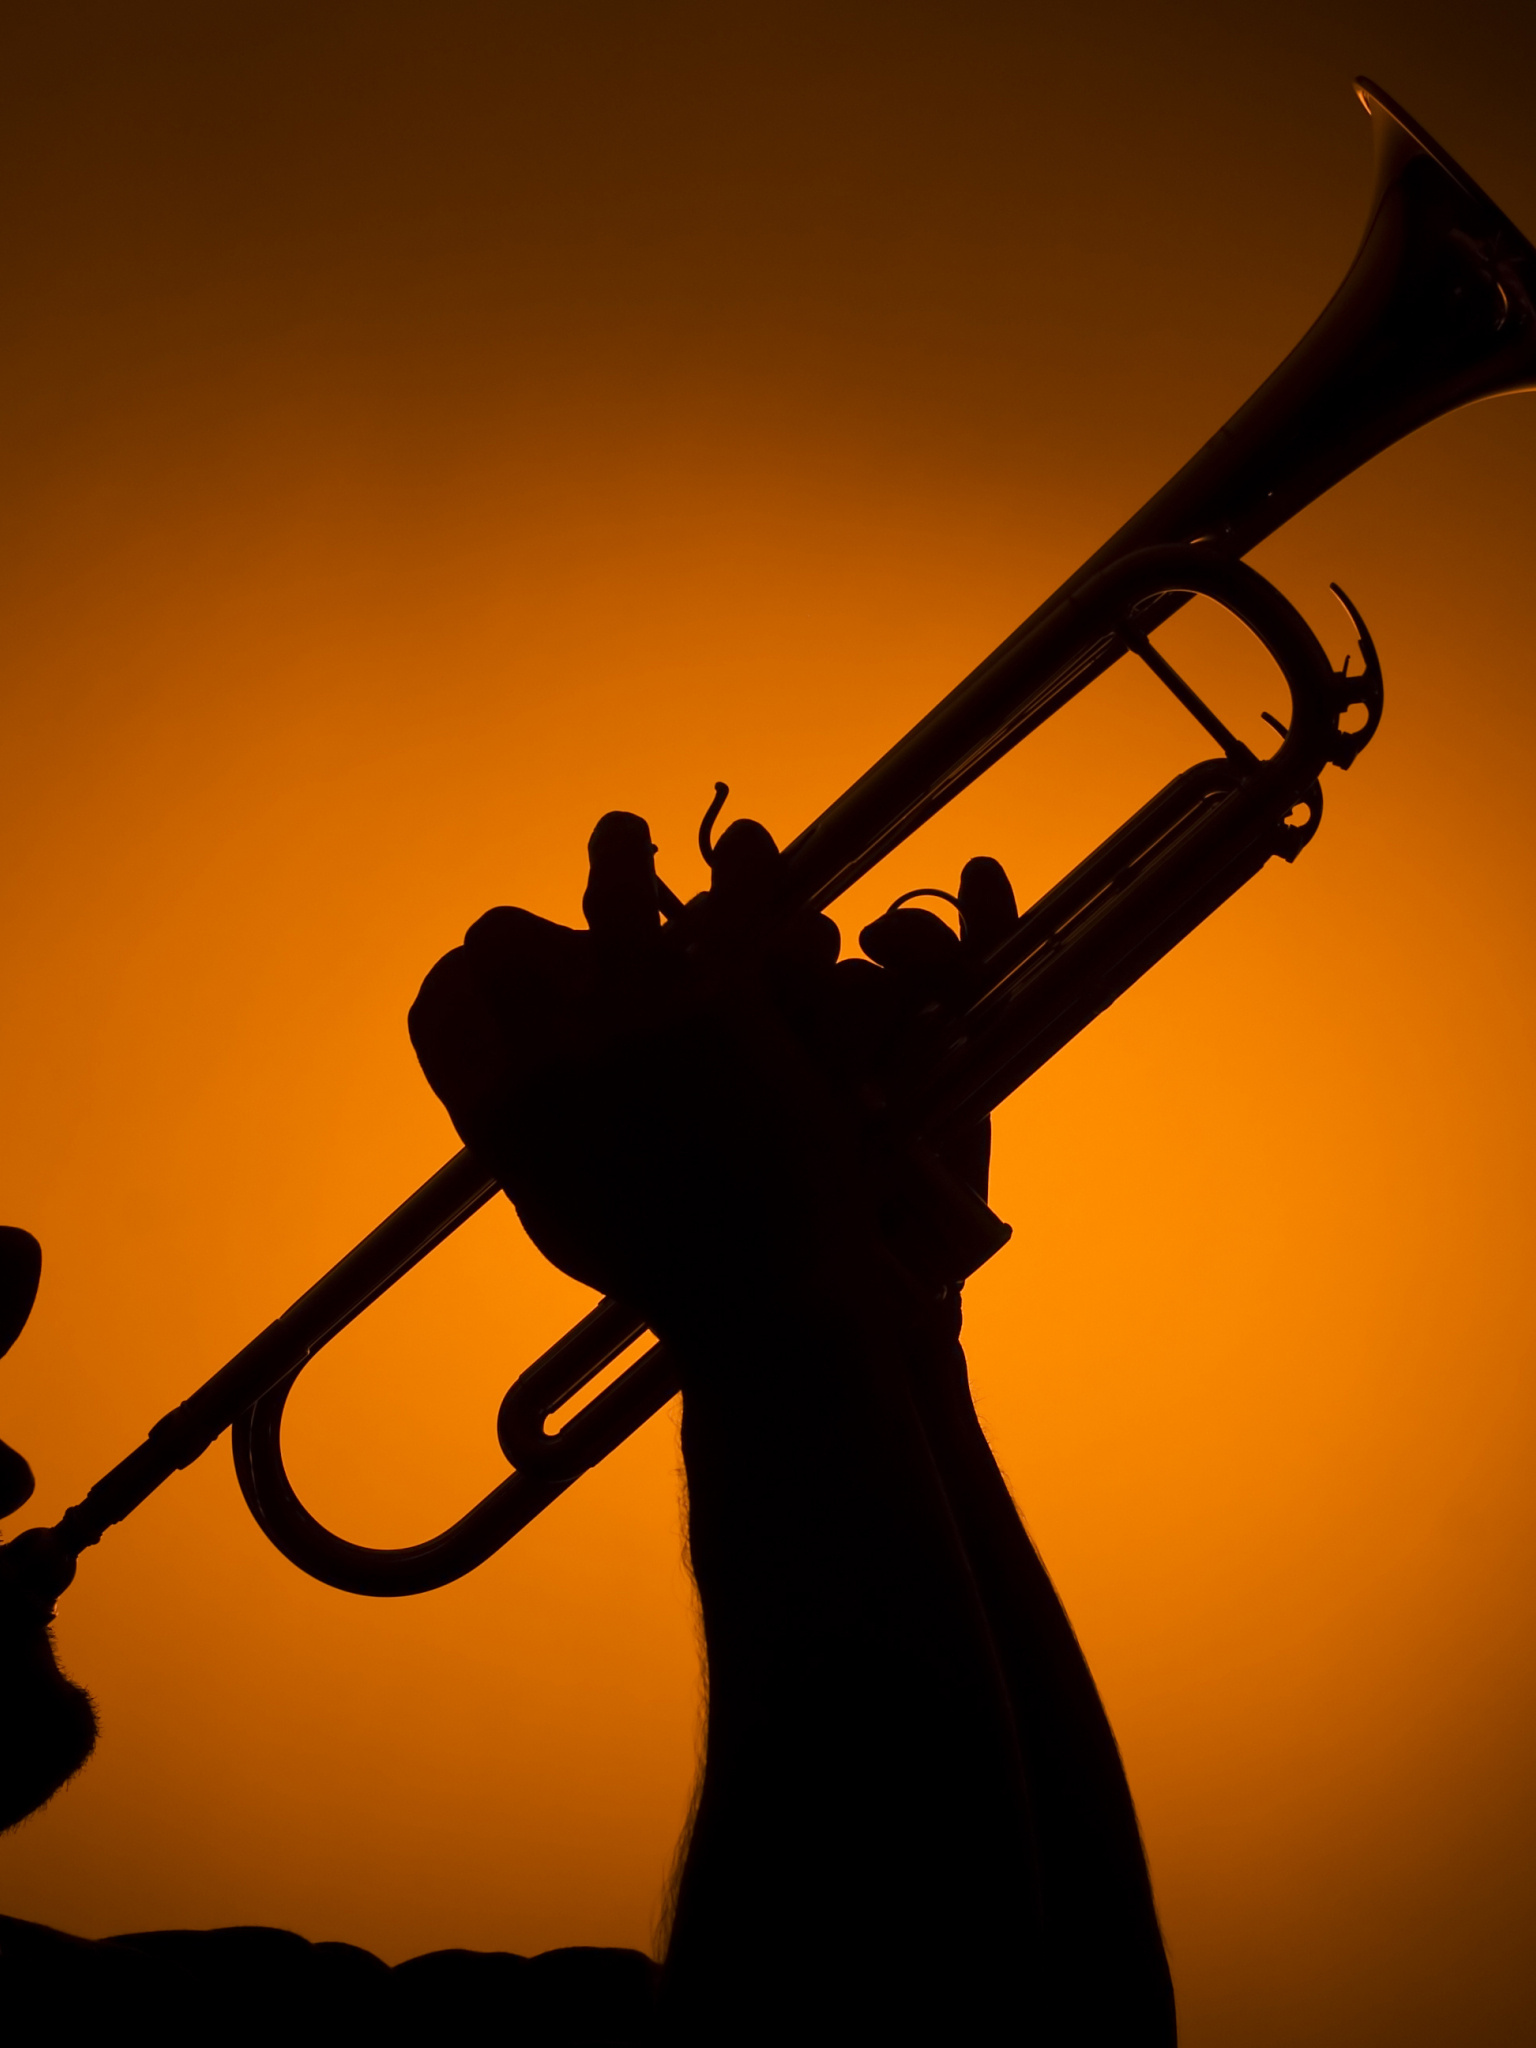 Trumpet: Extended trumpet techniques, Flutter tonguing, Double tonguing, Virtuosity. 1540x2050 HD Background.